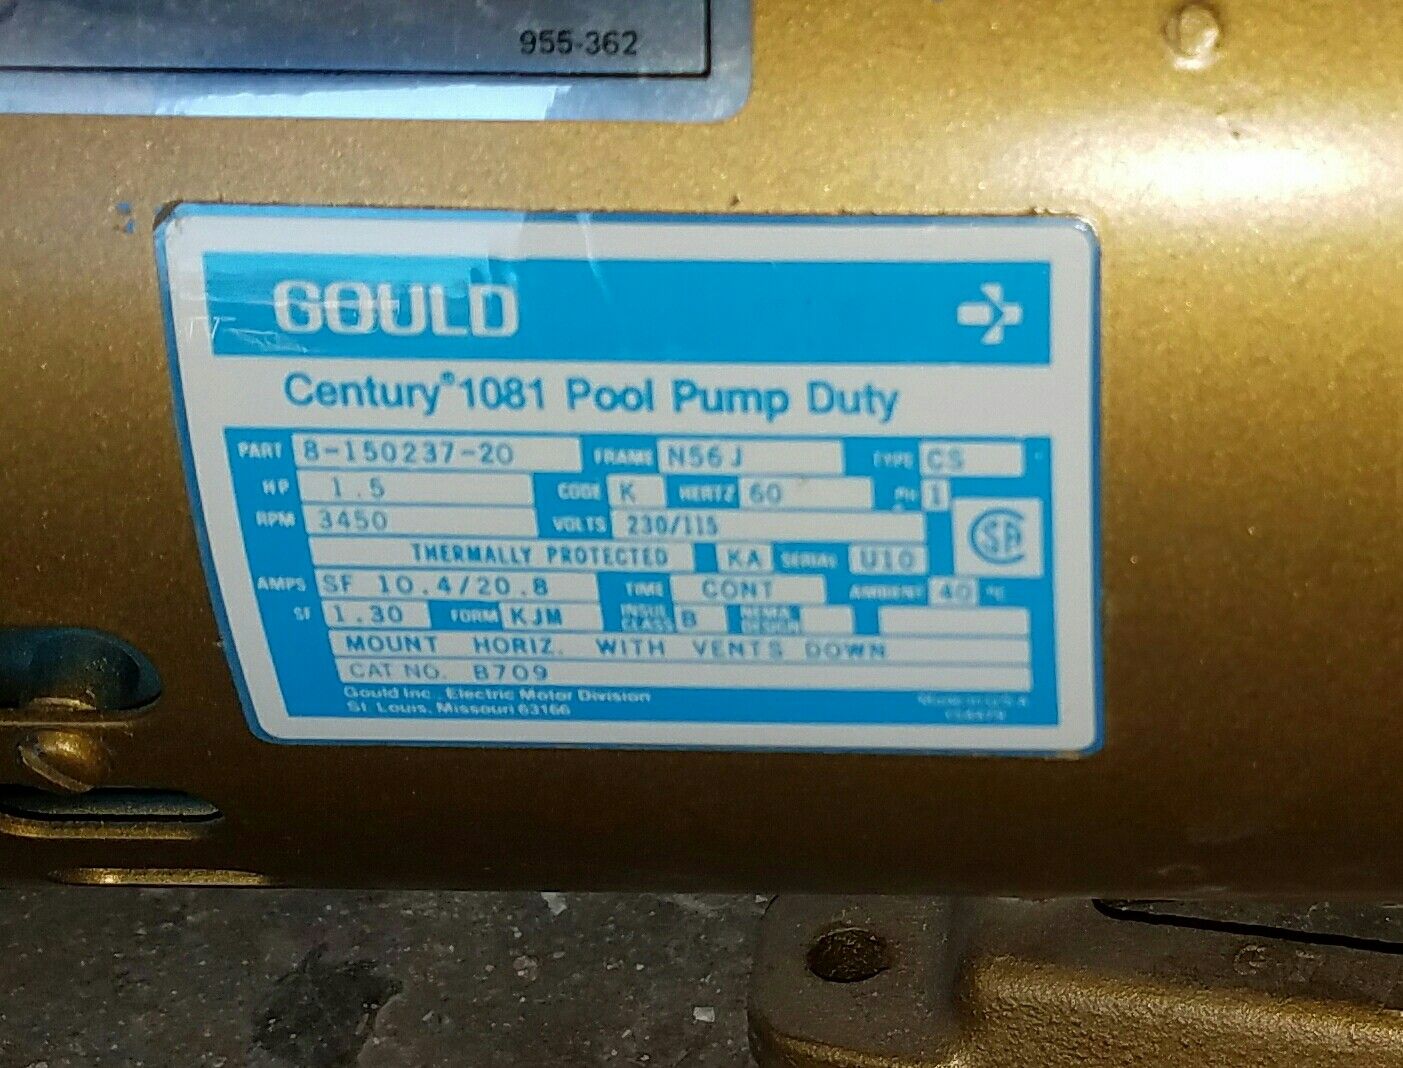 GOULD 1.5hp 3450rpm Pool & Spa Pump Motor by Jacuzzi